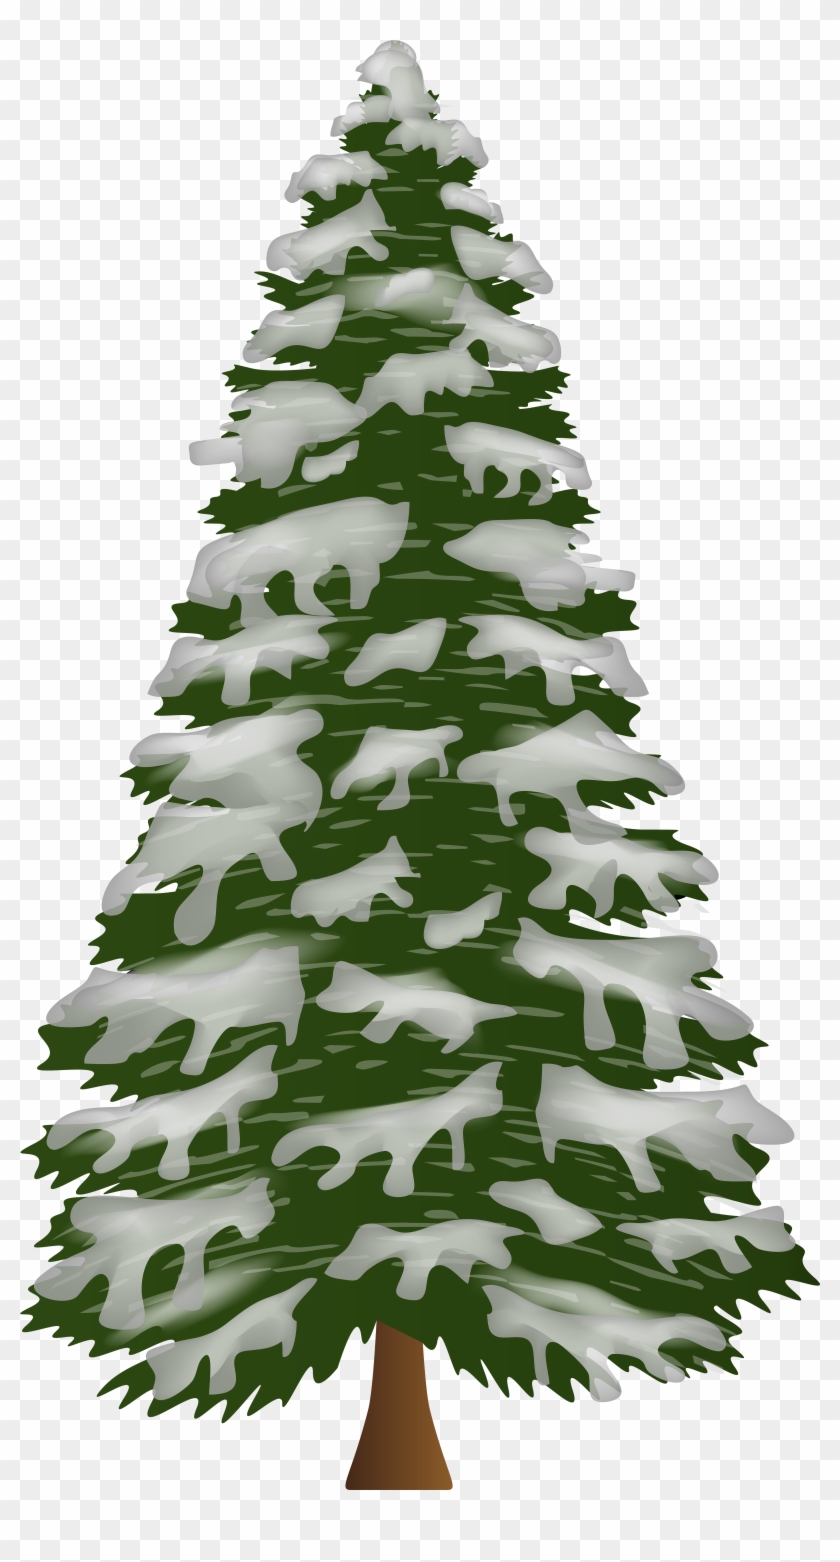 Pine Tree With Snow Png Clip Art Gallery Yopriceville Transparent Png #126166